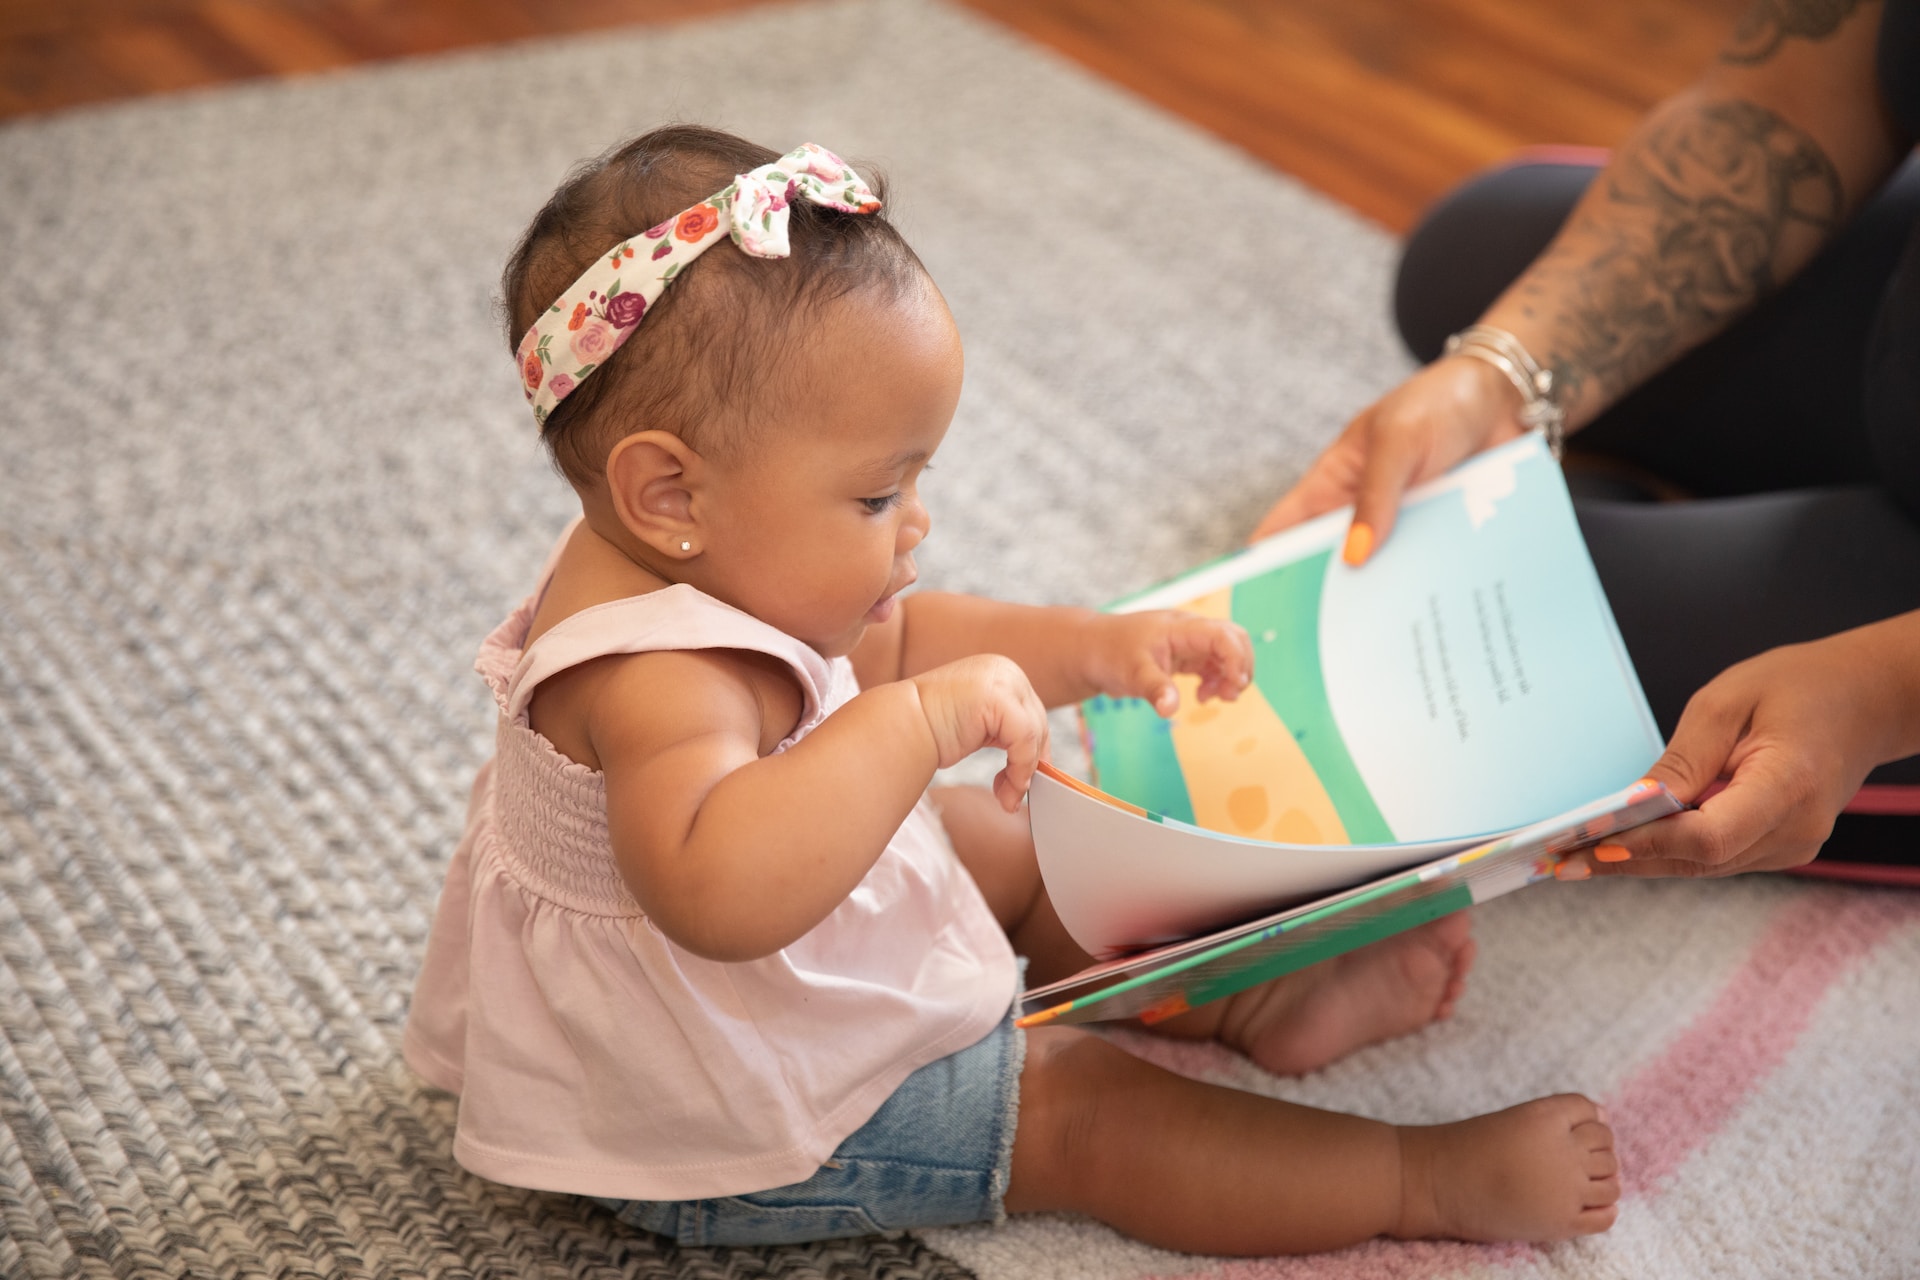 The photo shows a toddler looking at a picture book.